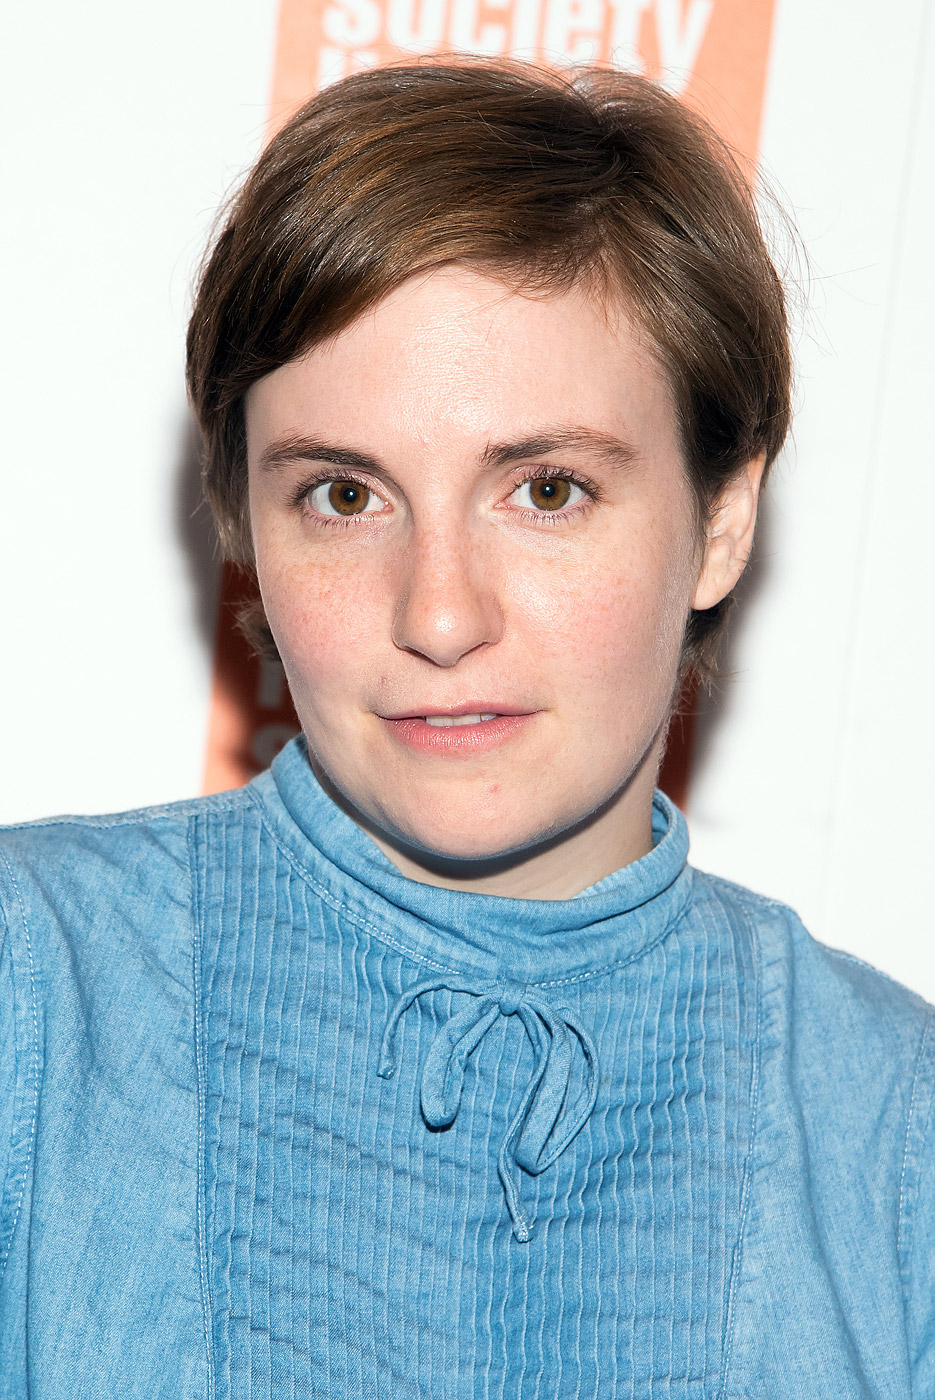 Lena Dunham attends the 2015 Film Society of Lincoln Center Summer Talks with Judd Apatow and Lena Dunham at Walter Reade Theater on July 13, 2015 in New York City. (Mike Pont—WireImage/Getty Images)